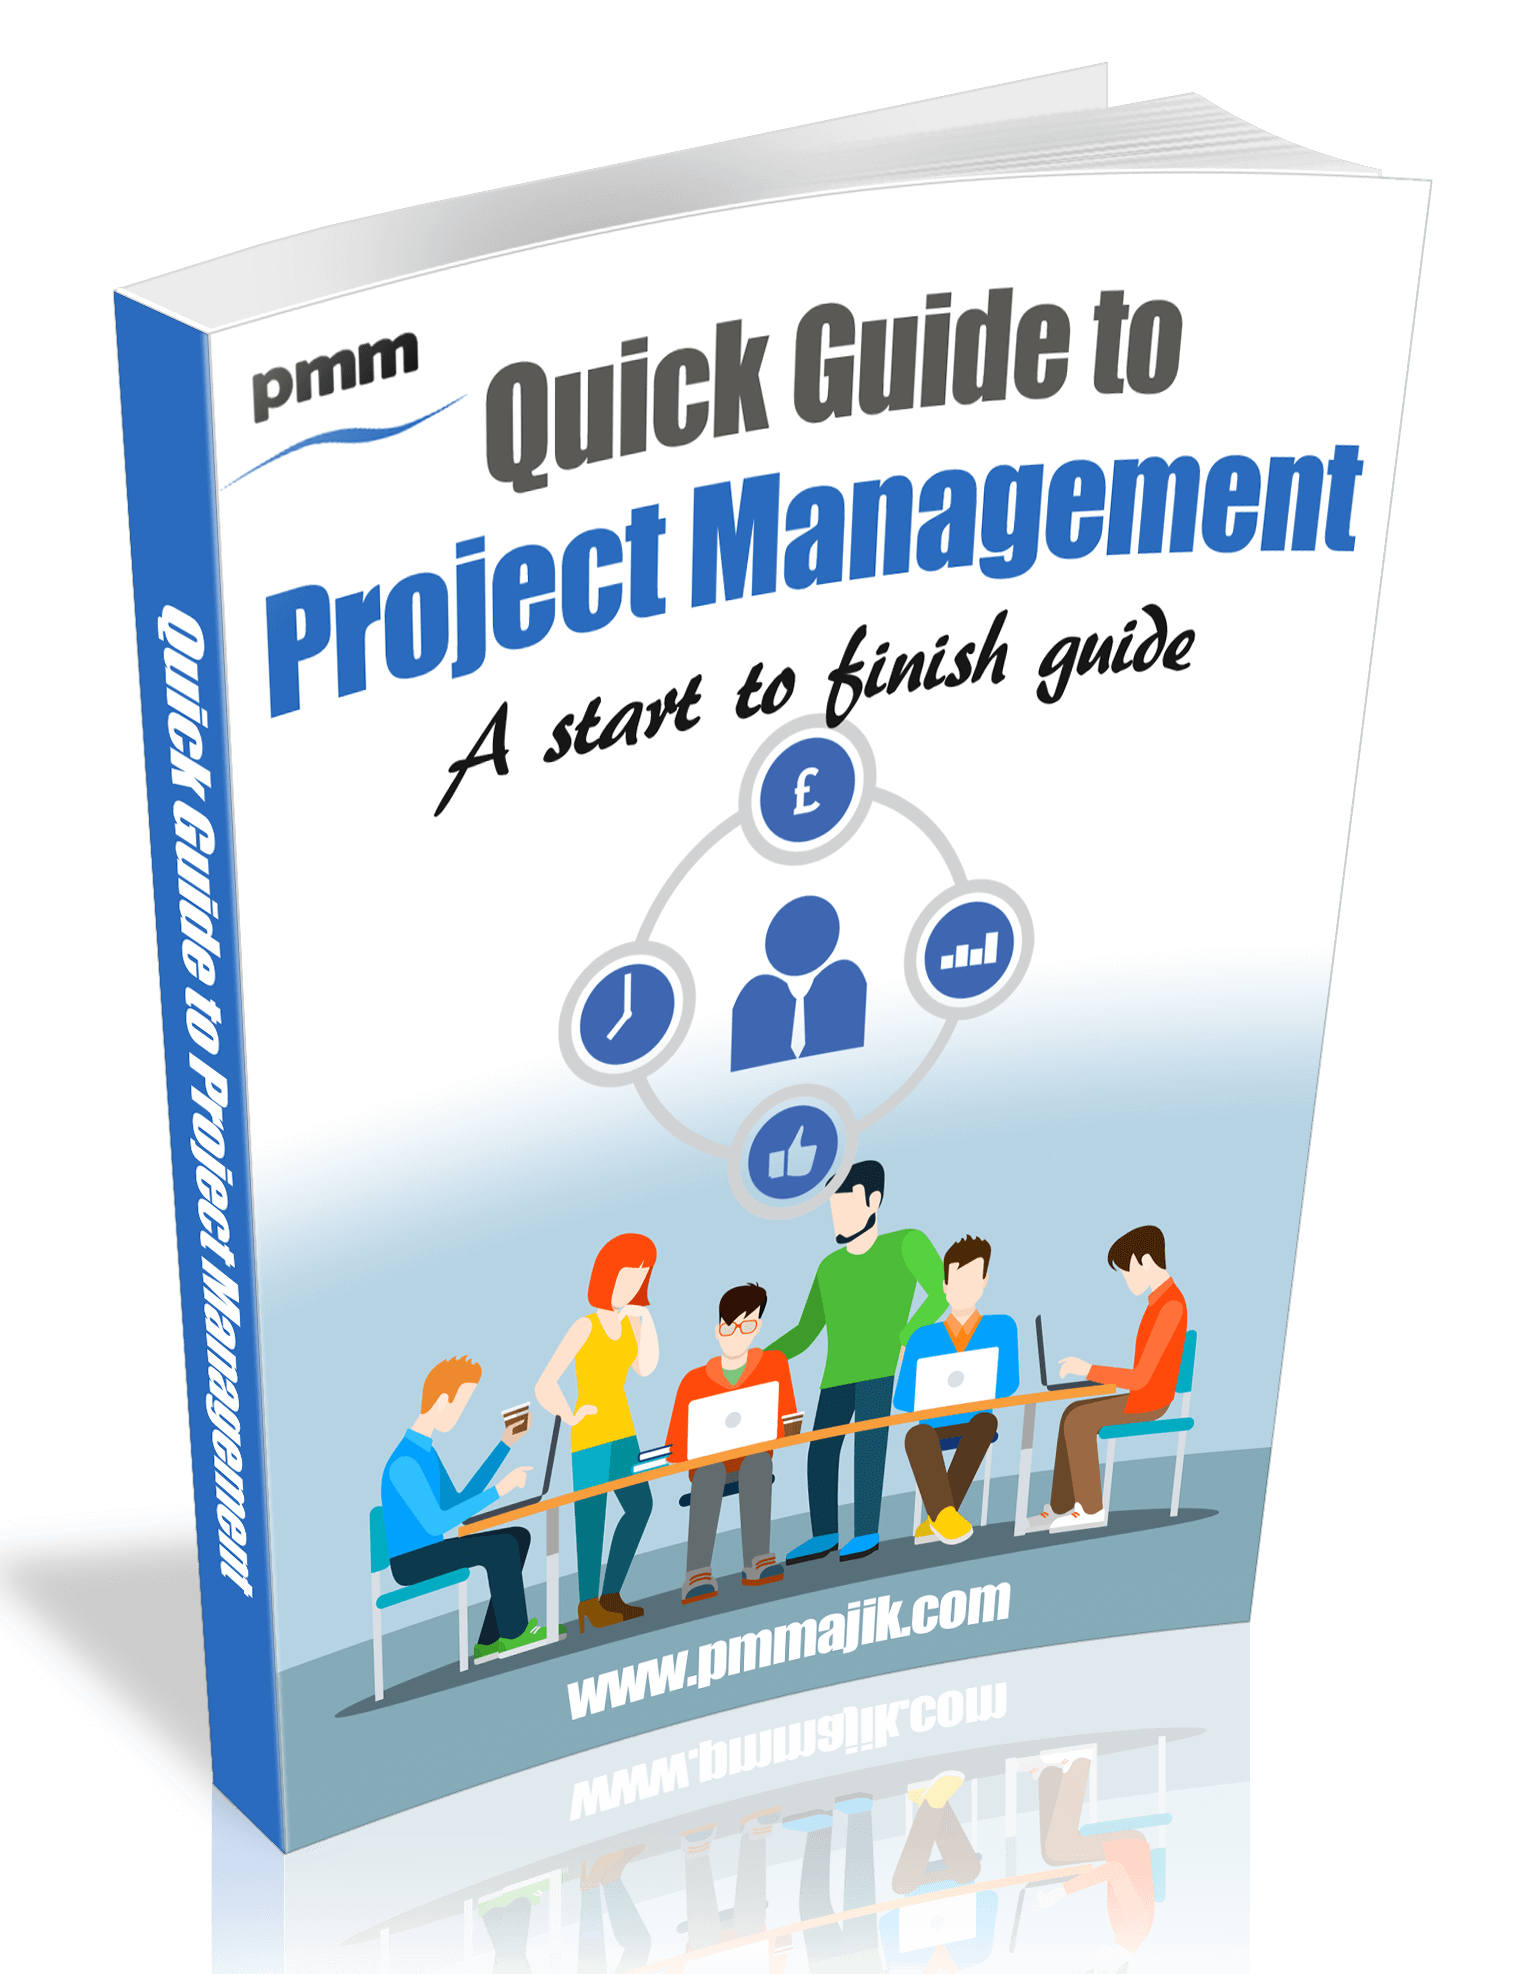 New Resource: Quick Guide to Project Management